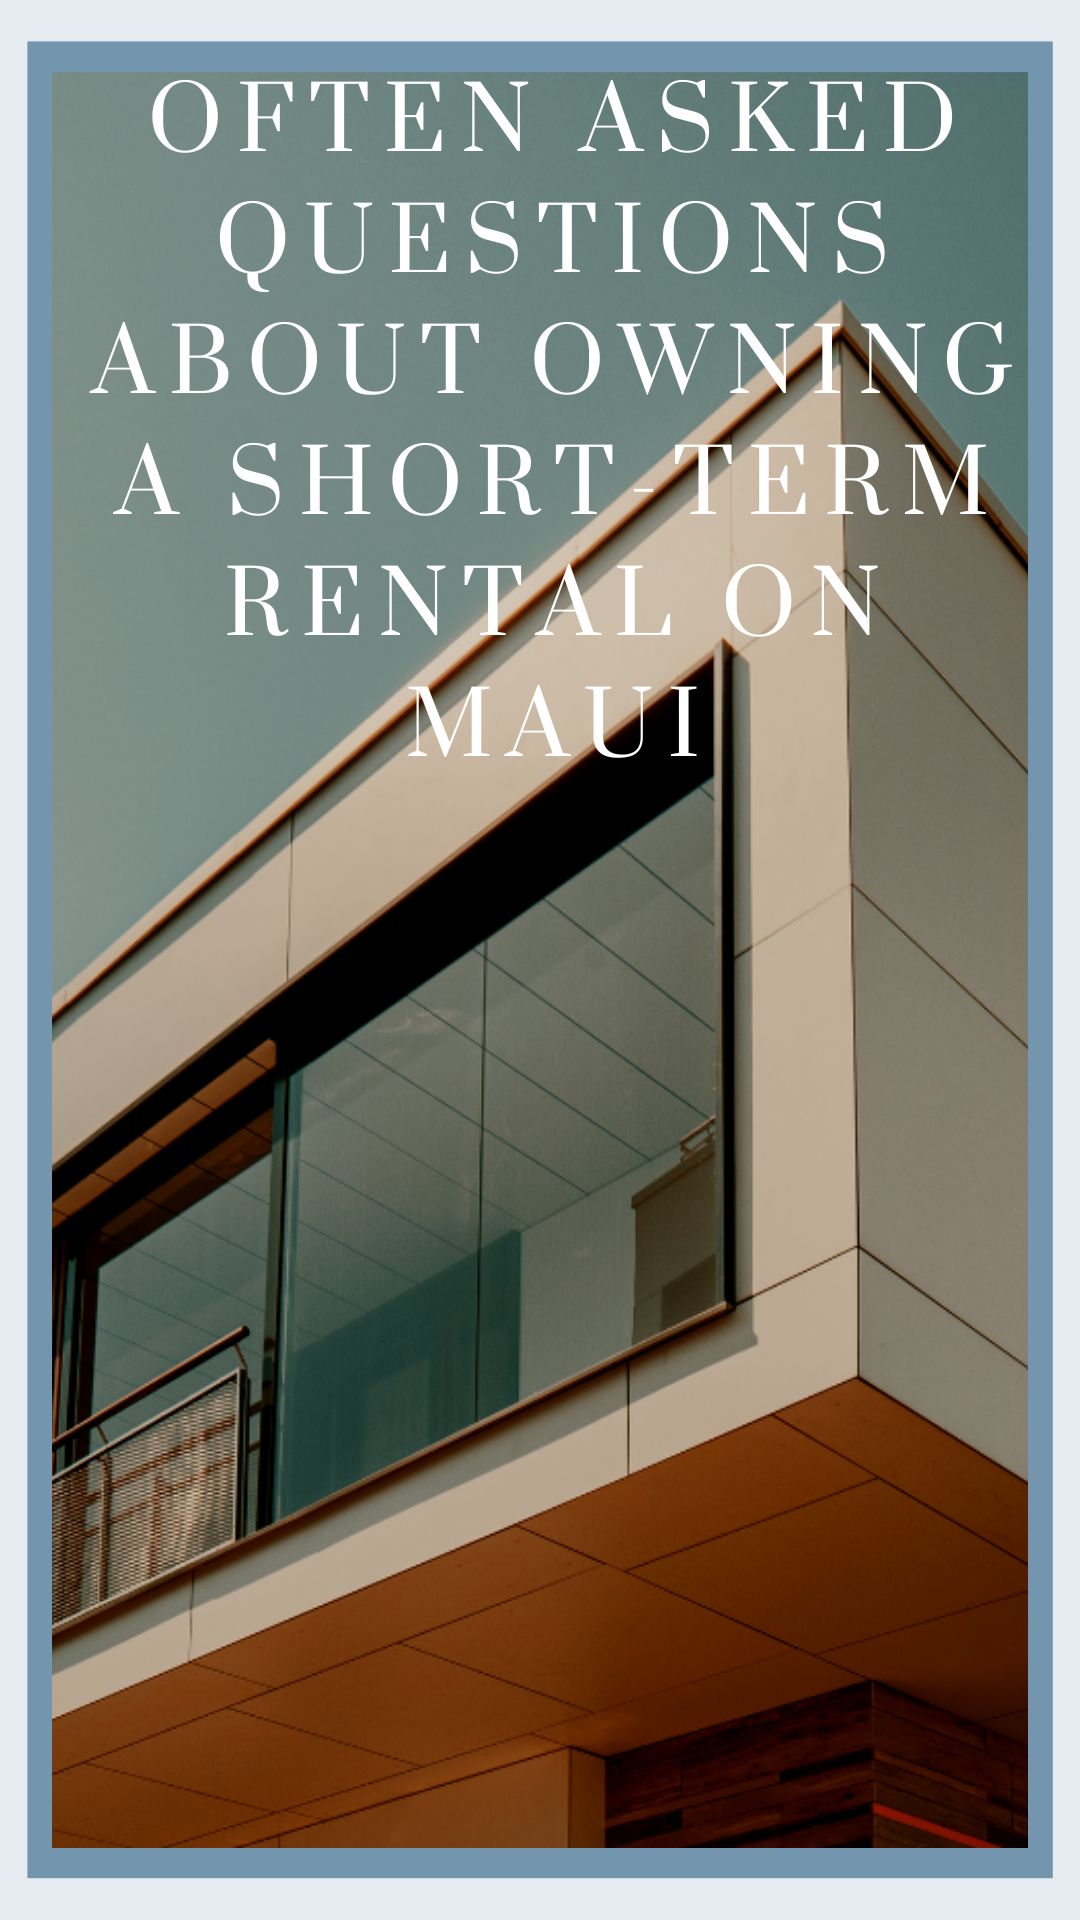 Often Asked Questions About Owning a Short Term Rental on Maui